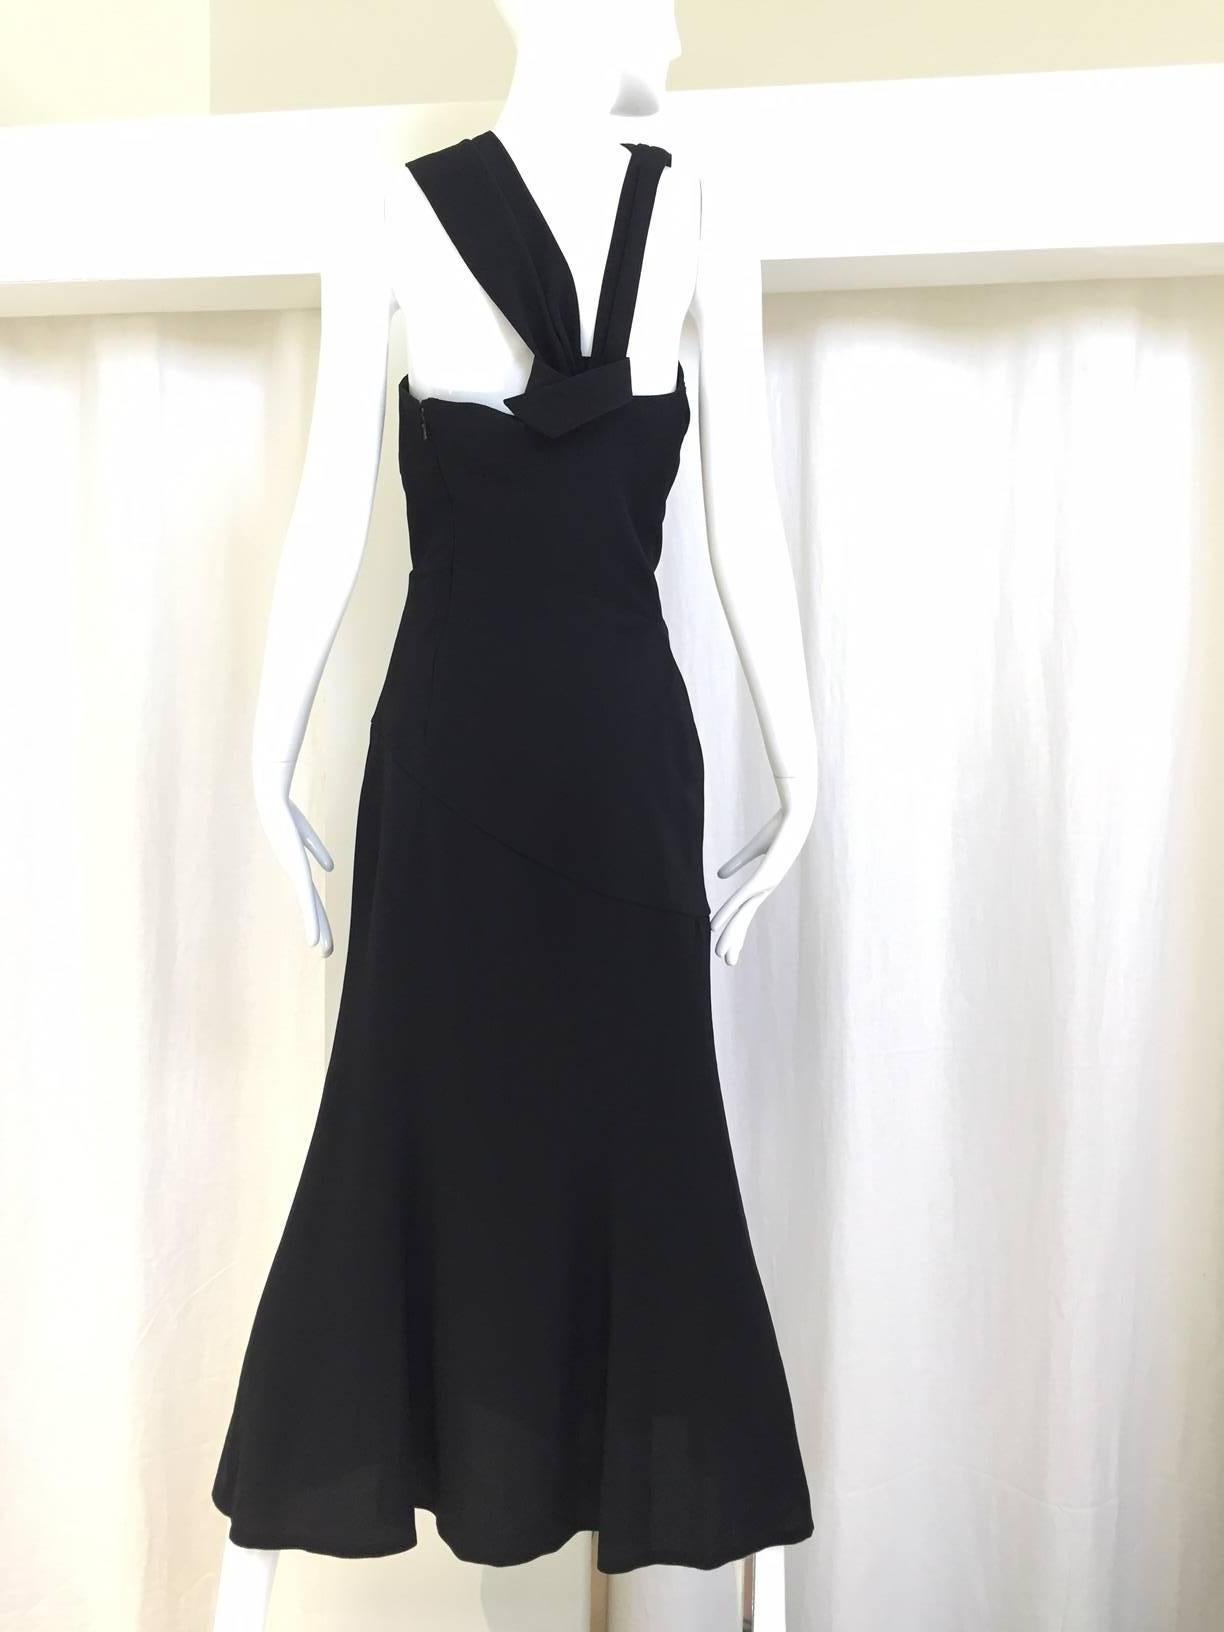 Sexy Vintage Thierry Mugler black dress with asymmetrical neckline.
Perfect cocktail dress for summer.
Slit on the side. Tag size: 38
Bust: 33